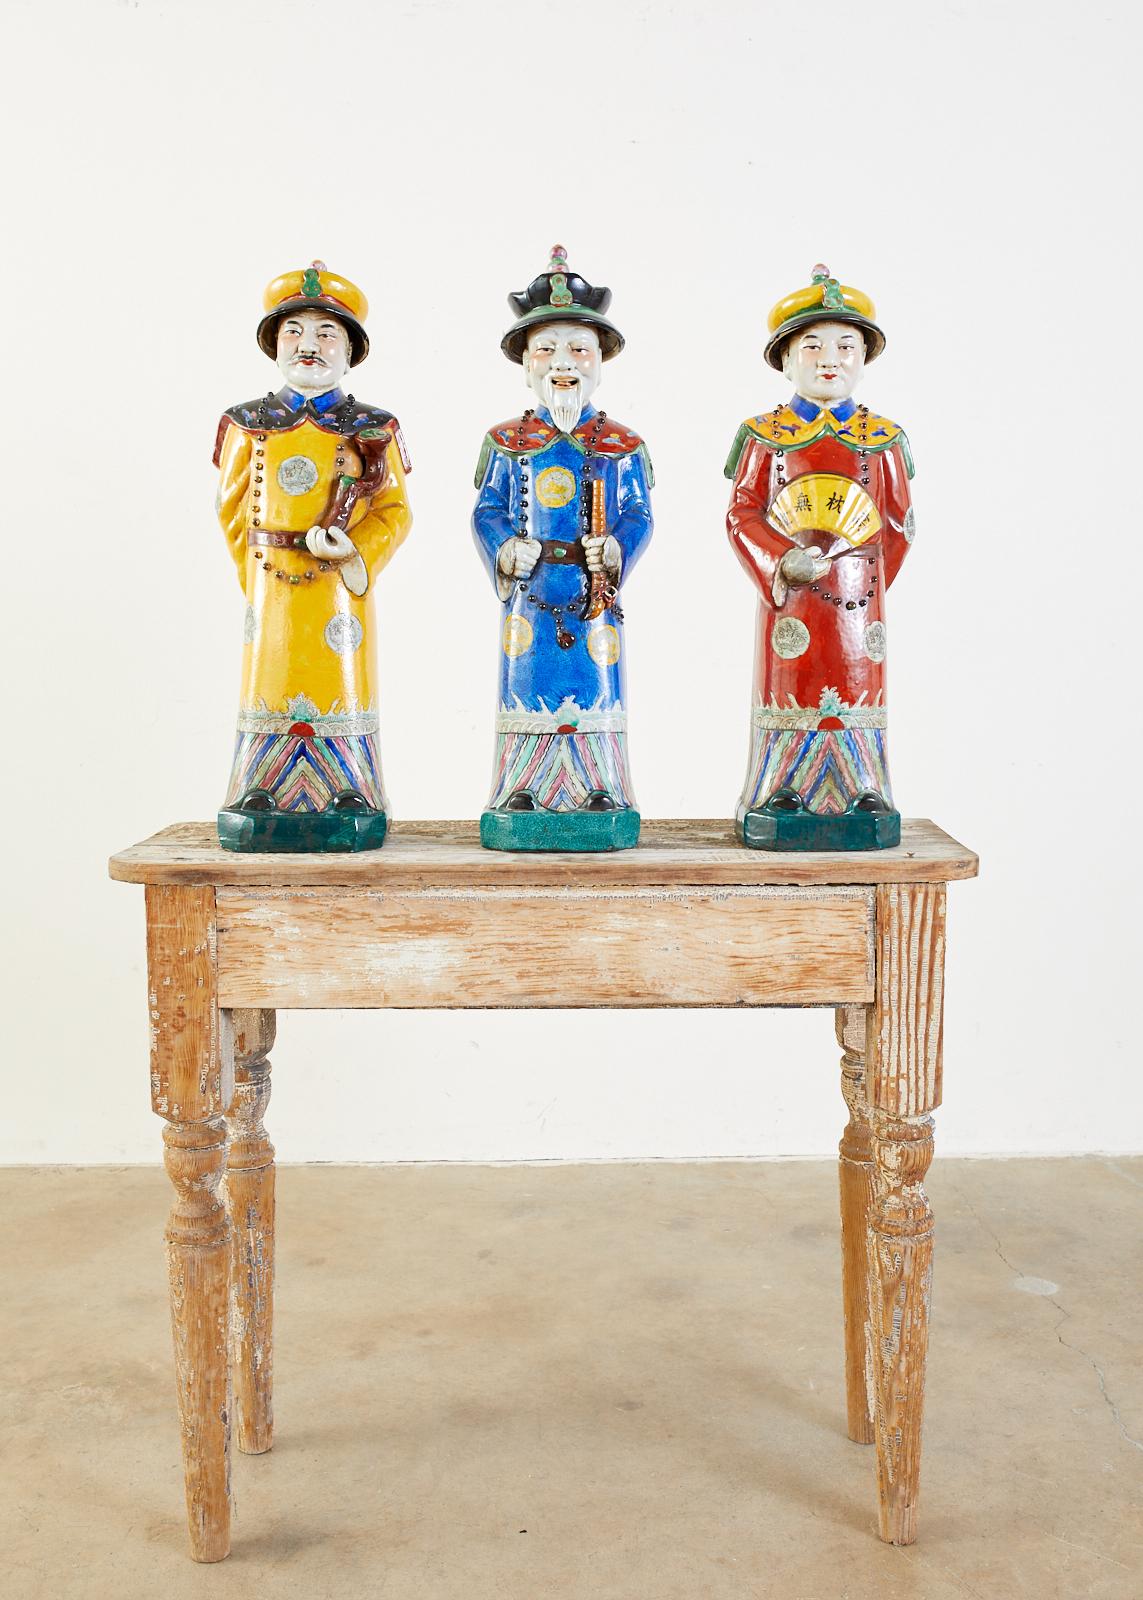 Colorful set of three large Chinese porcelain Qing emperor, royal, and monarch figural group. Beautifully glazed with a wucai style having flamboyant robes and hats. Decorated with beaded necklaces holding a flute, a fan, and a ruyi-head scepter.